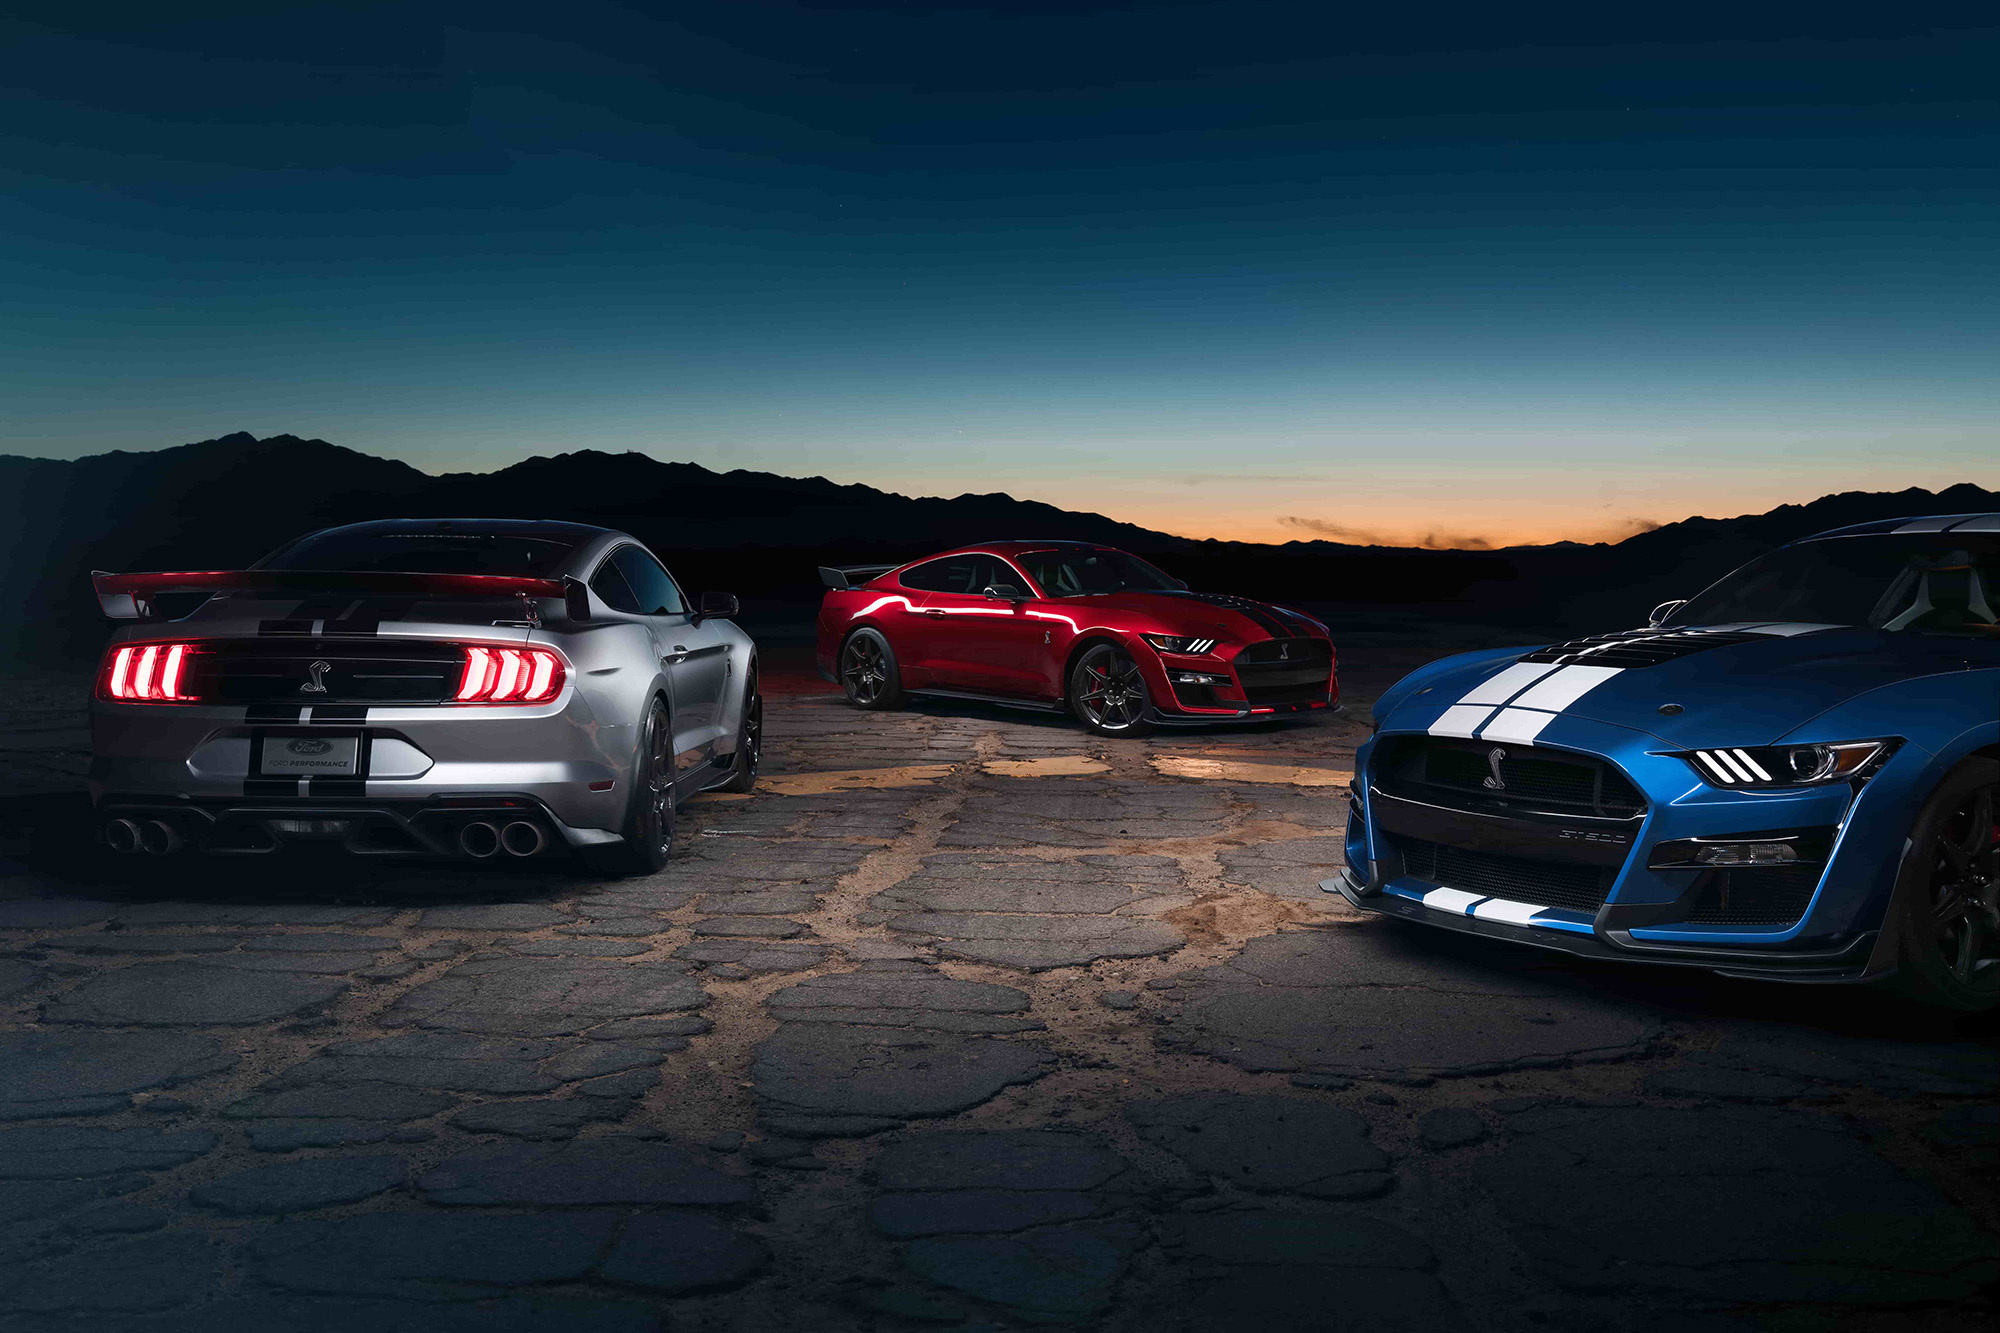 GT500, Ford Mustang Shelby GT500, Cobra unleashed, High-performance excellence, 2000x1340 HD Desktop